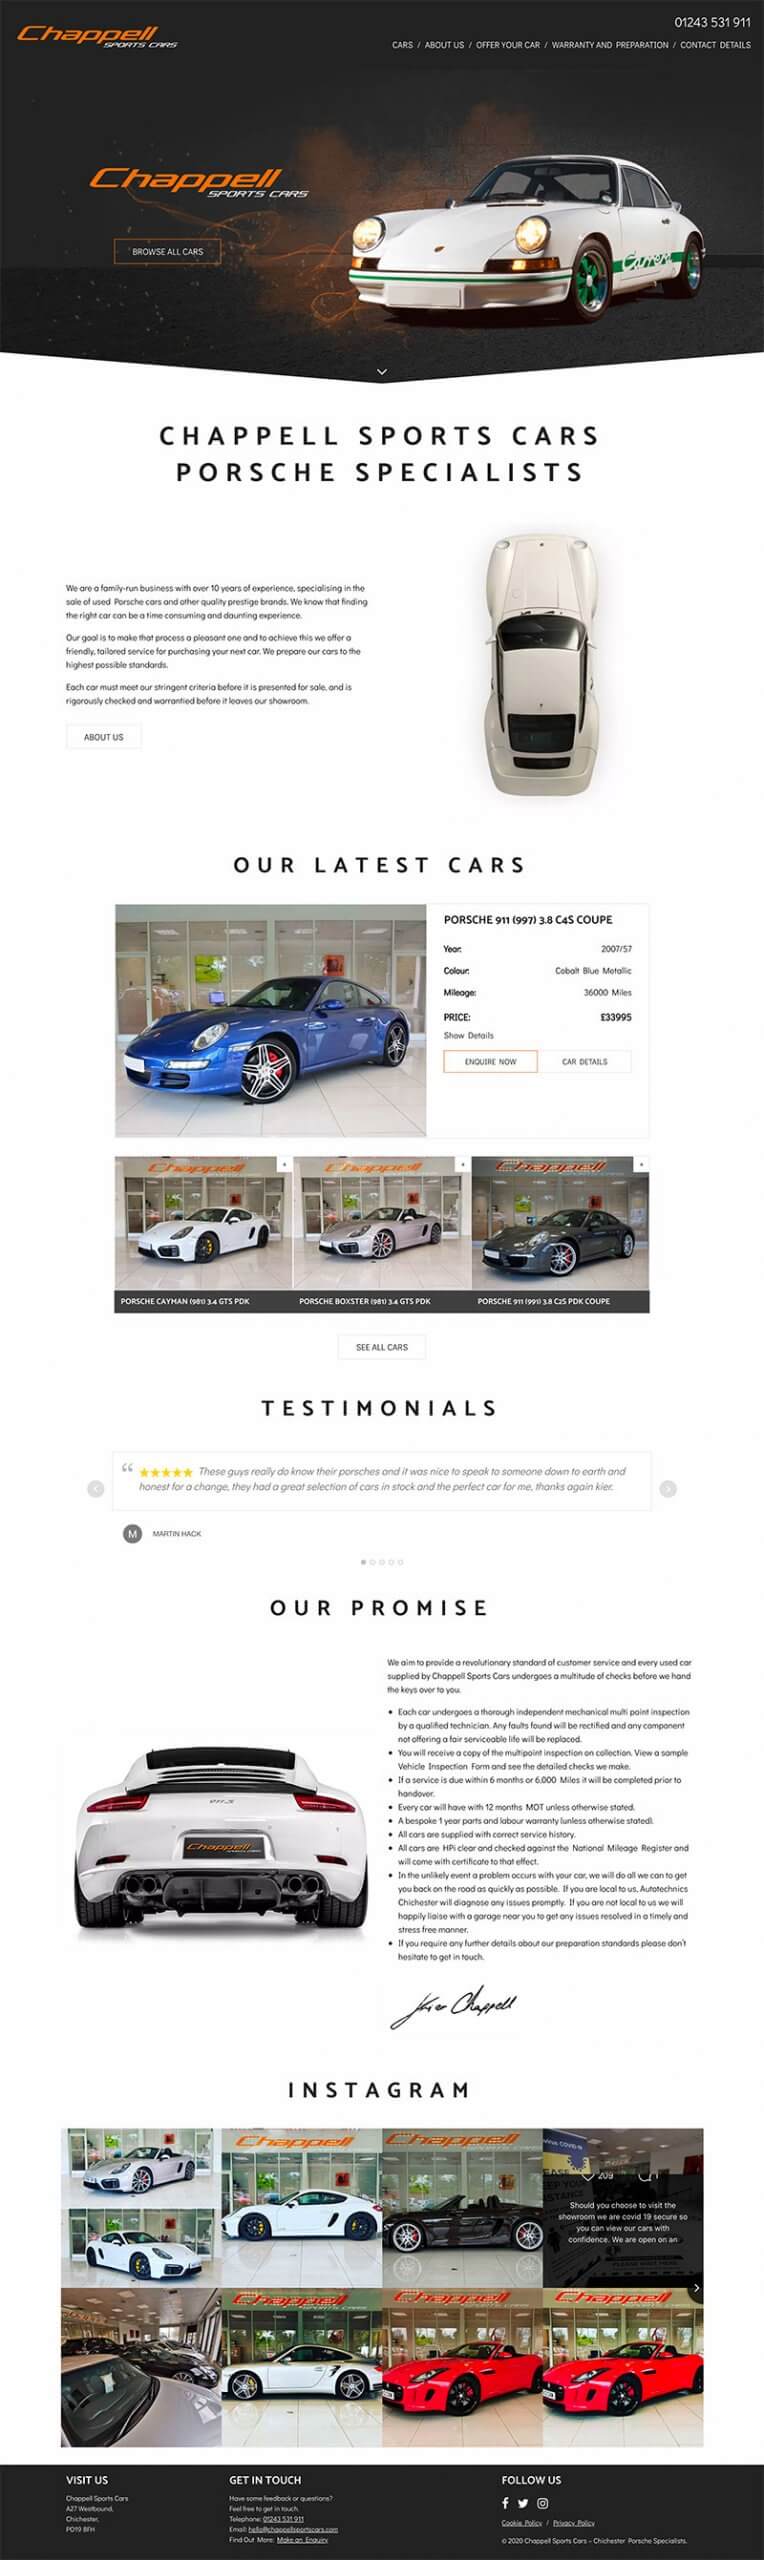 Chappell Sports cars - Home Page